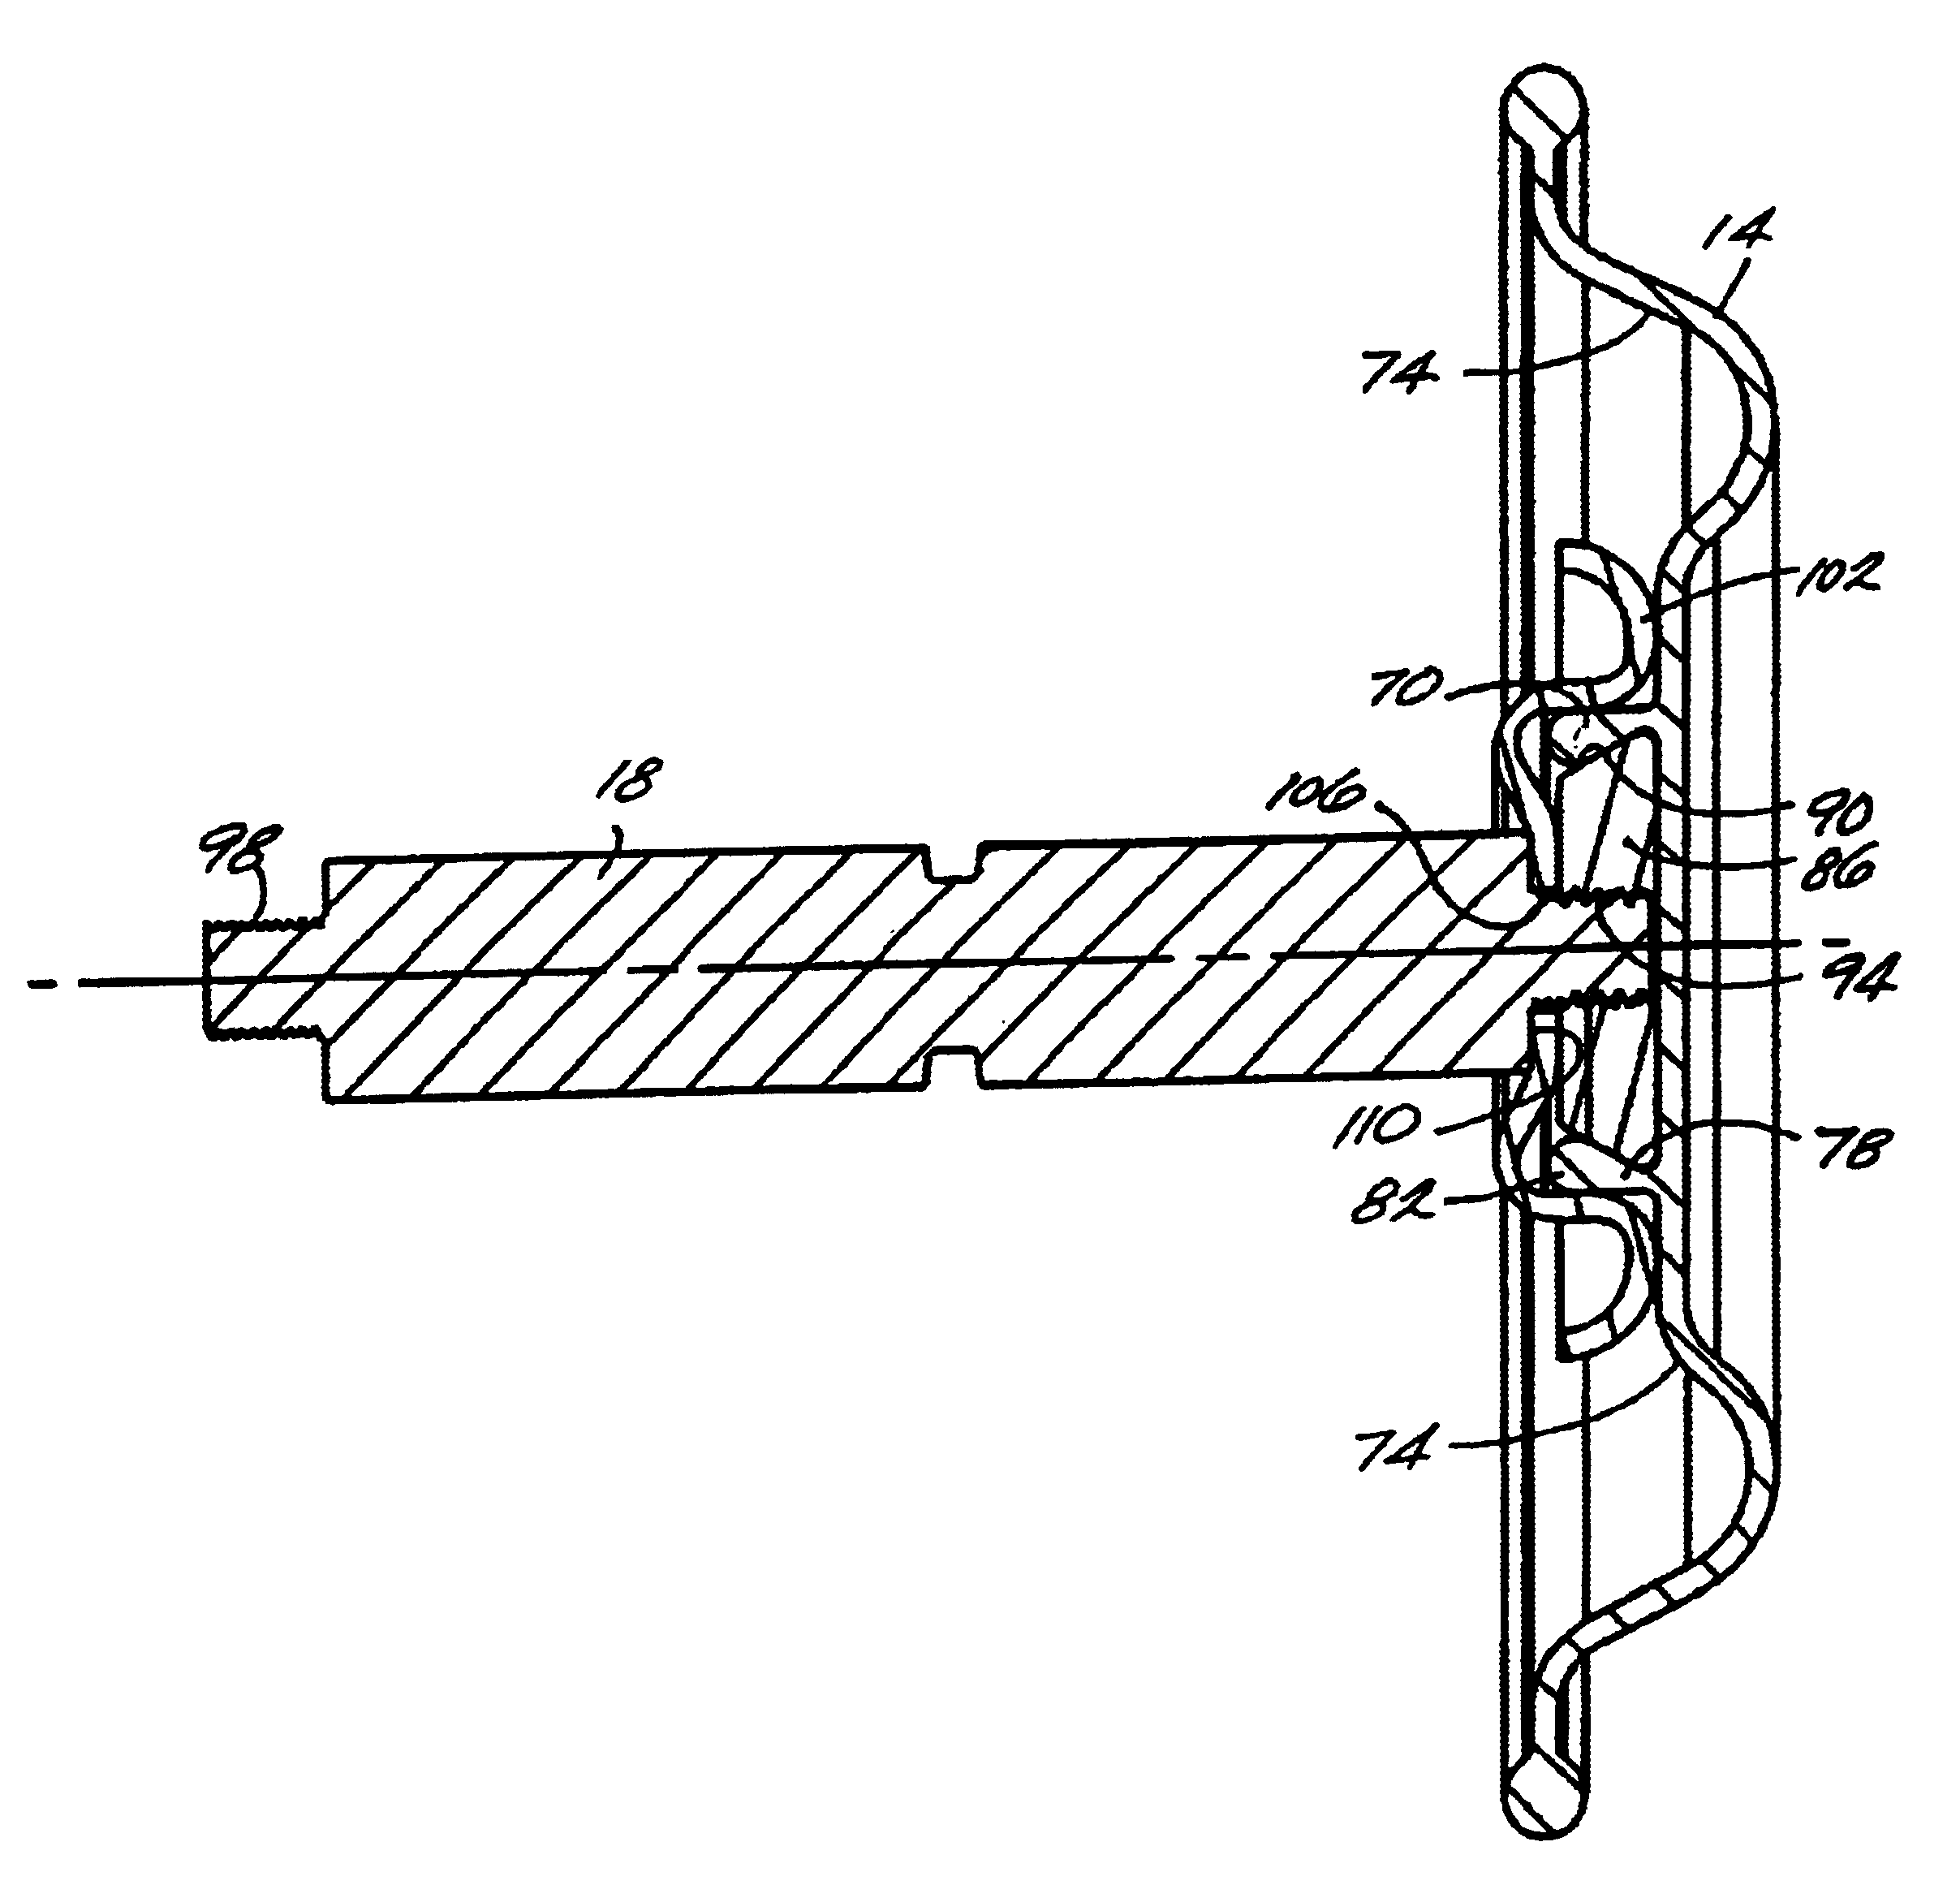 Connecting configuration for a diaphragm in a diaphragm pump